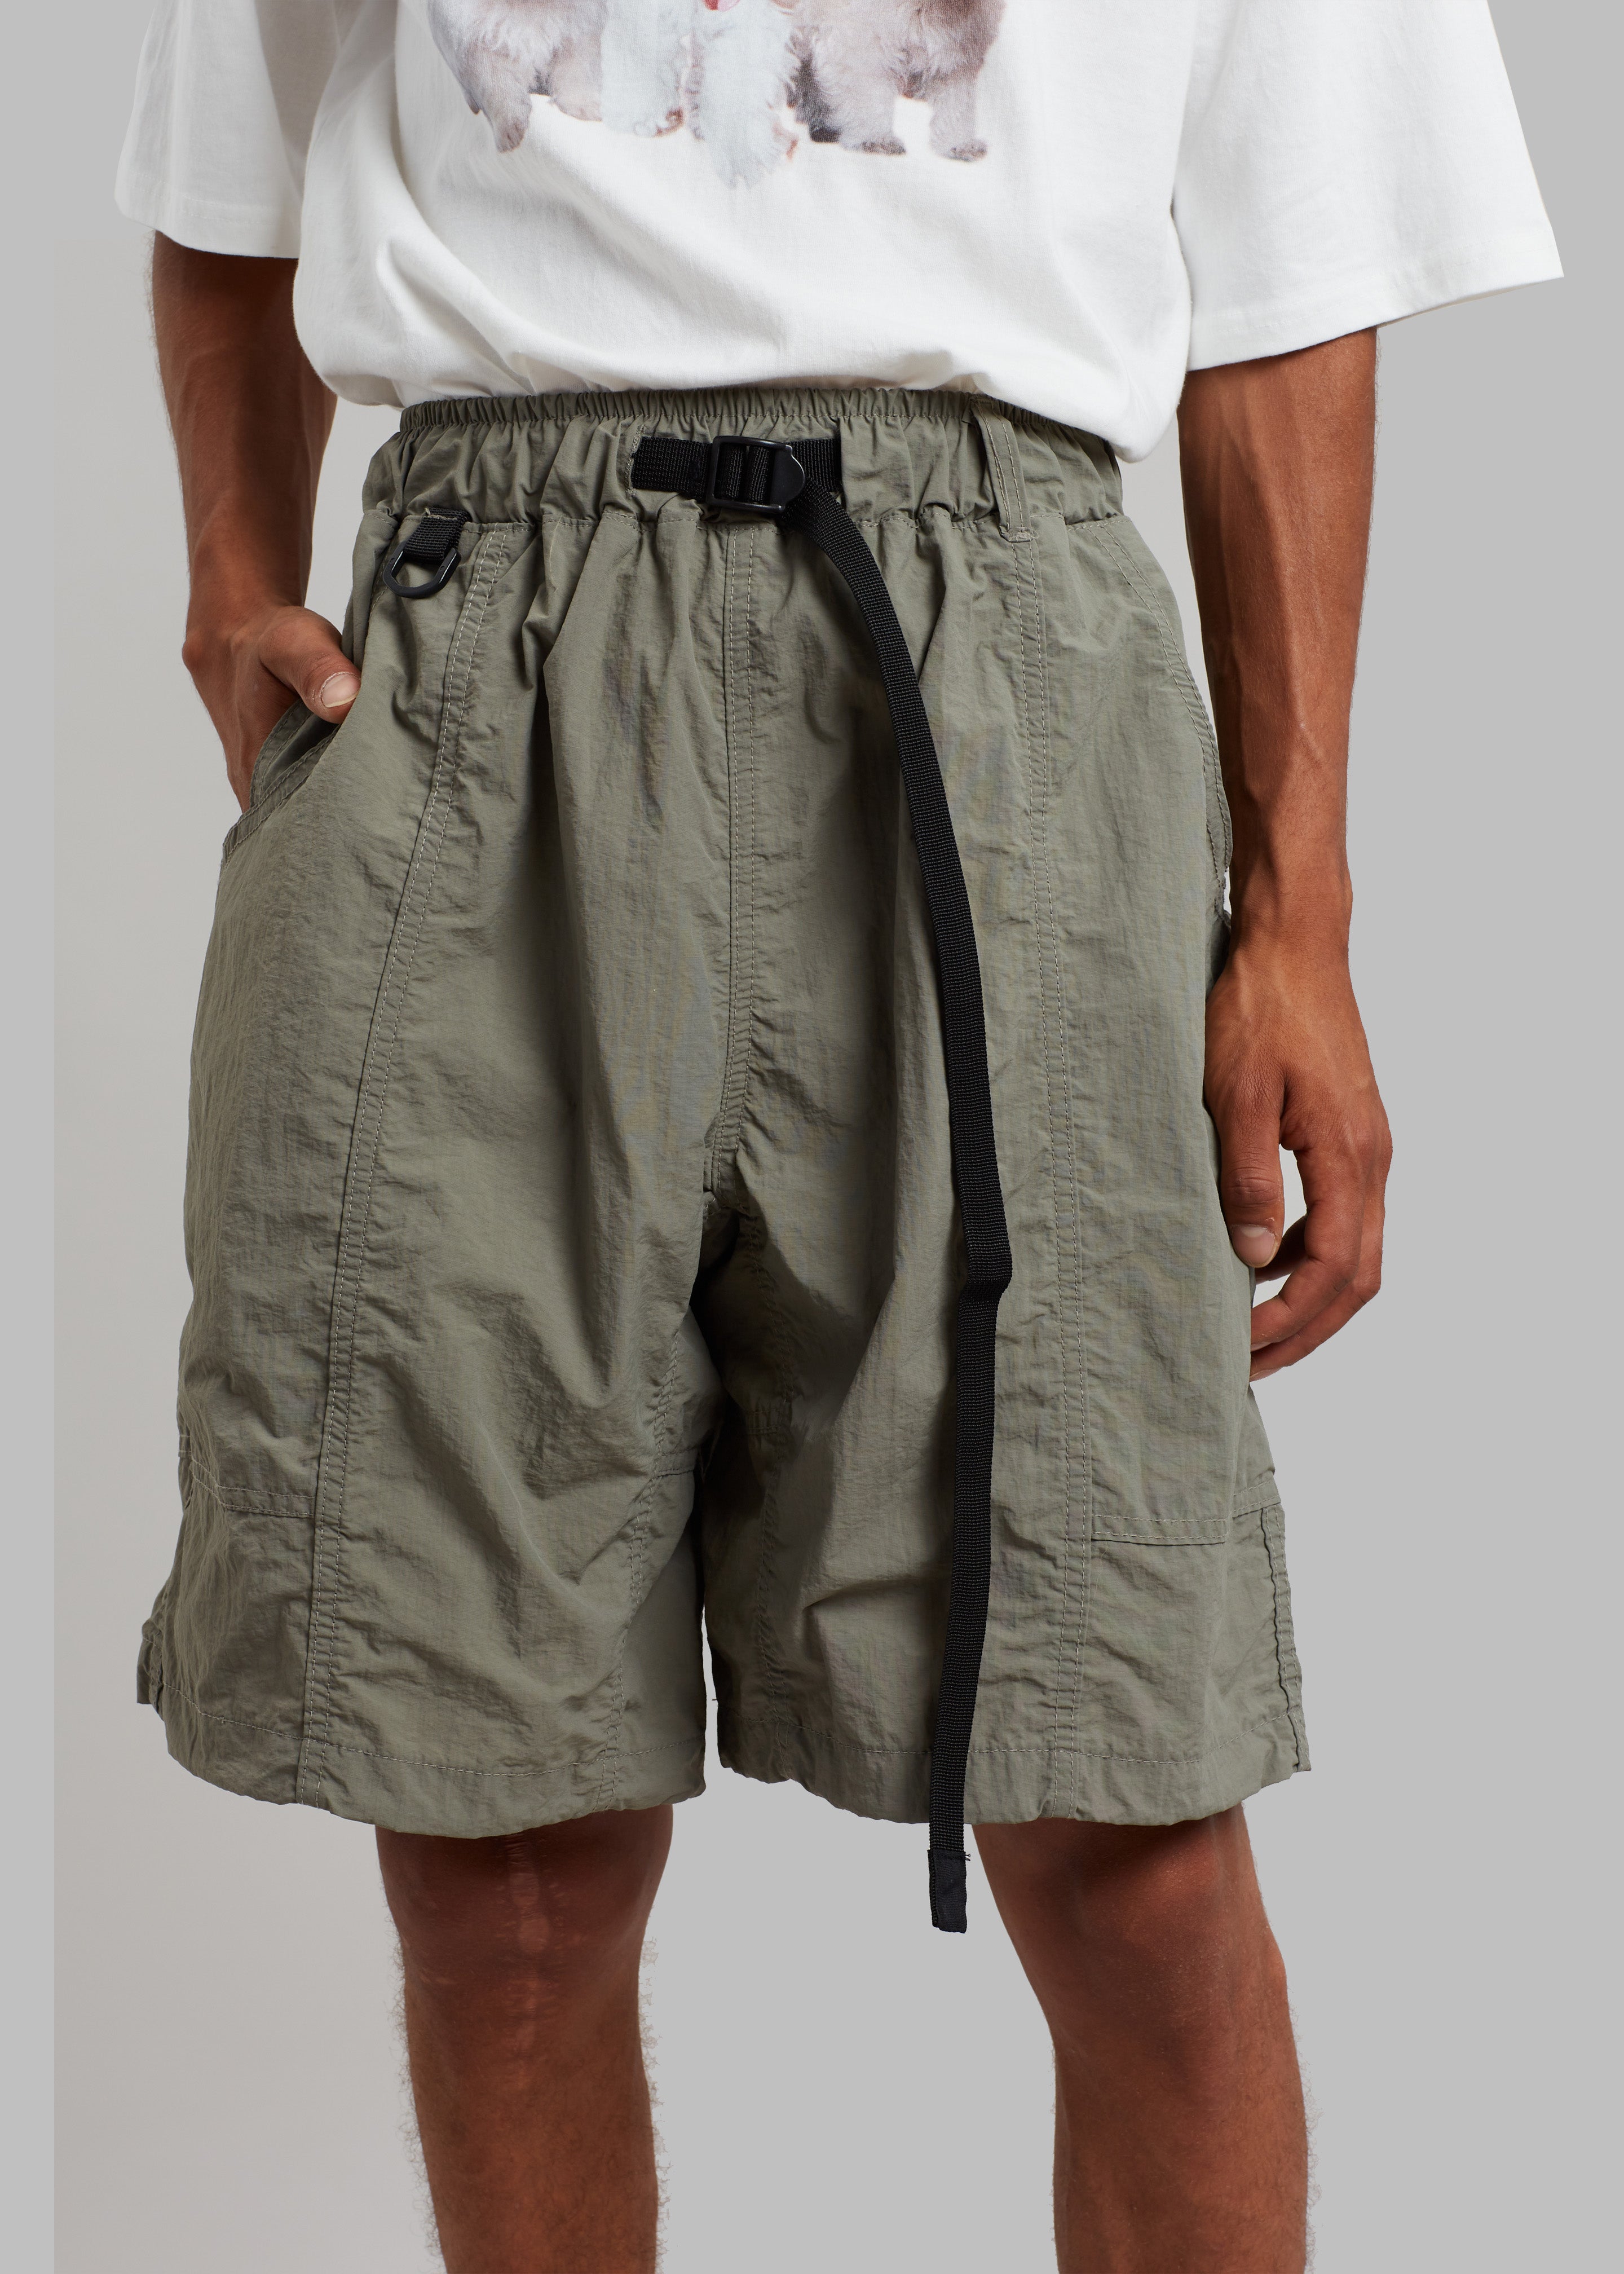 Arel Buckle Shorts - Olive - 6